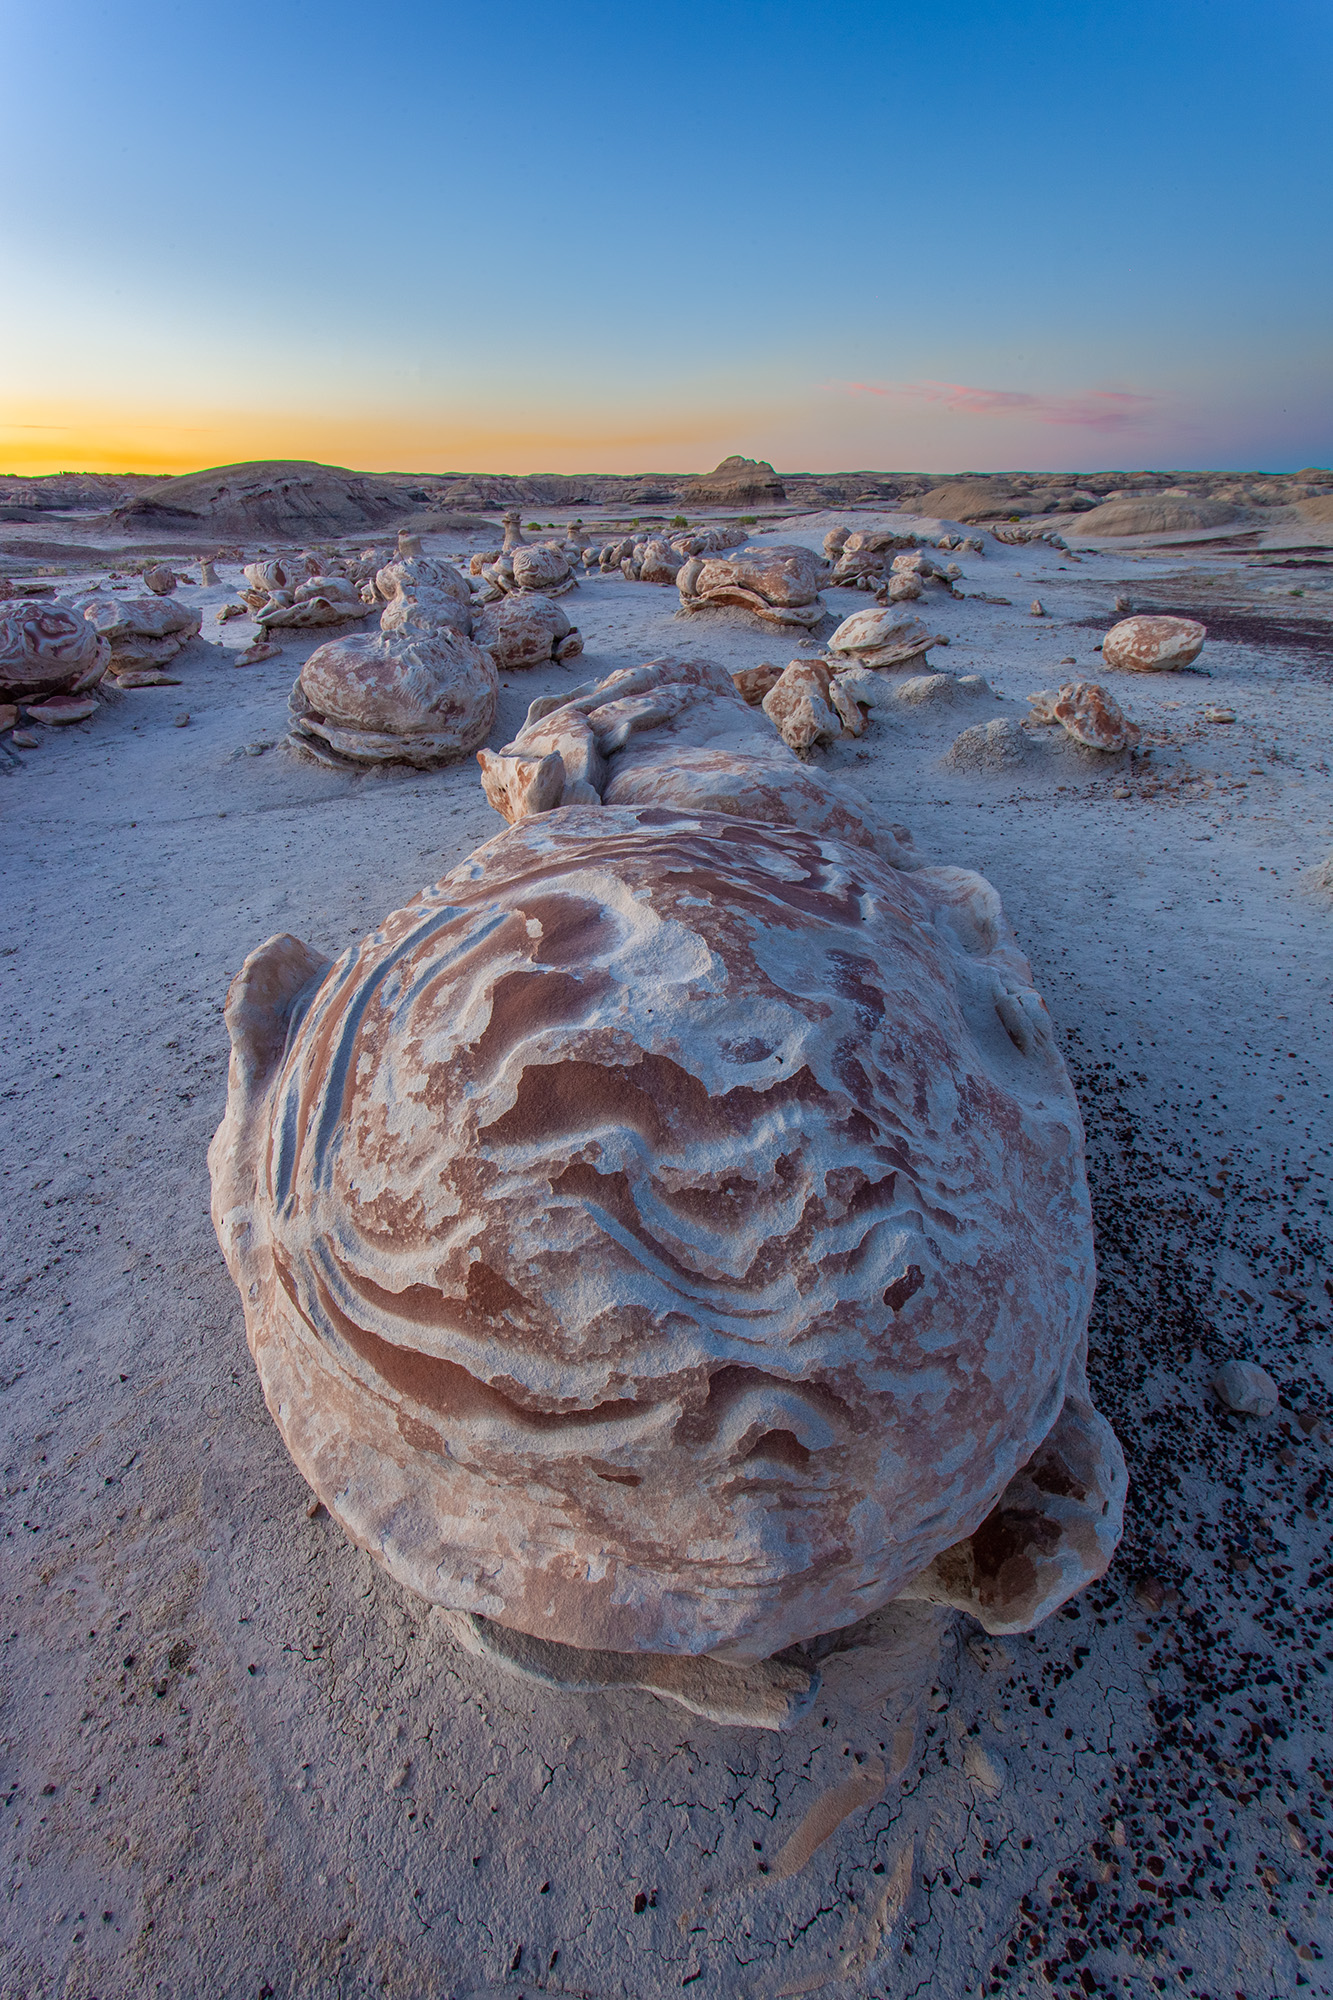 "The Enigmatic Egg Factory" offers a mesmerizing glimpse into the heart of the Bisti Badlands, New Mexico. This image captures...